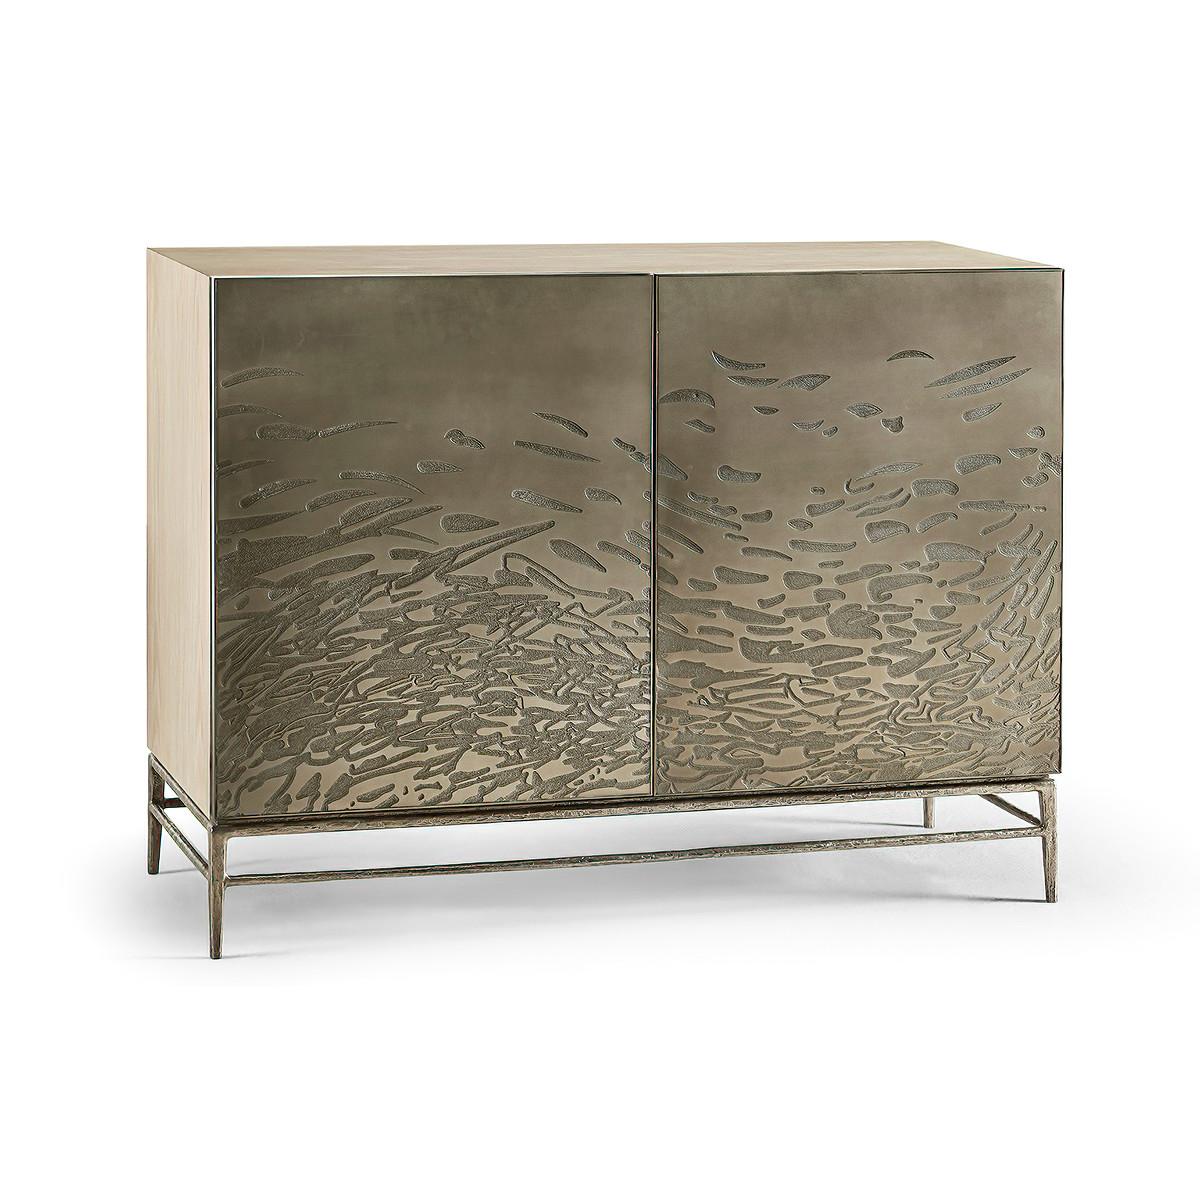 Modern etched brass flowing cabinet pairs bleached oak and metal and creates a stunning cabinet. The modern cabinet with age-old acid etched techniques on steel doors with an abstract flowing water motif in relief. Sitting atop delicate natural